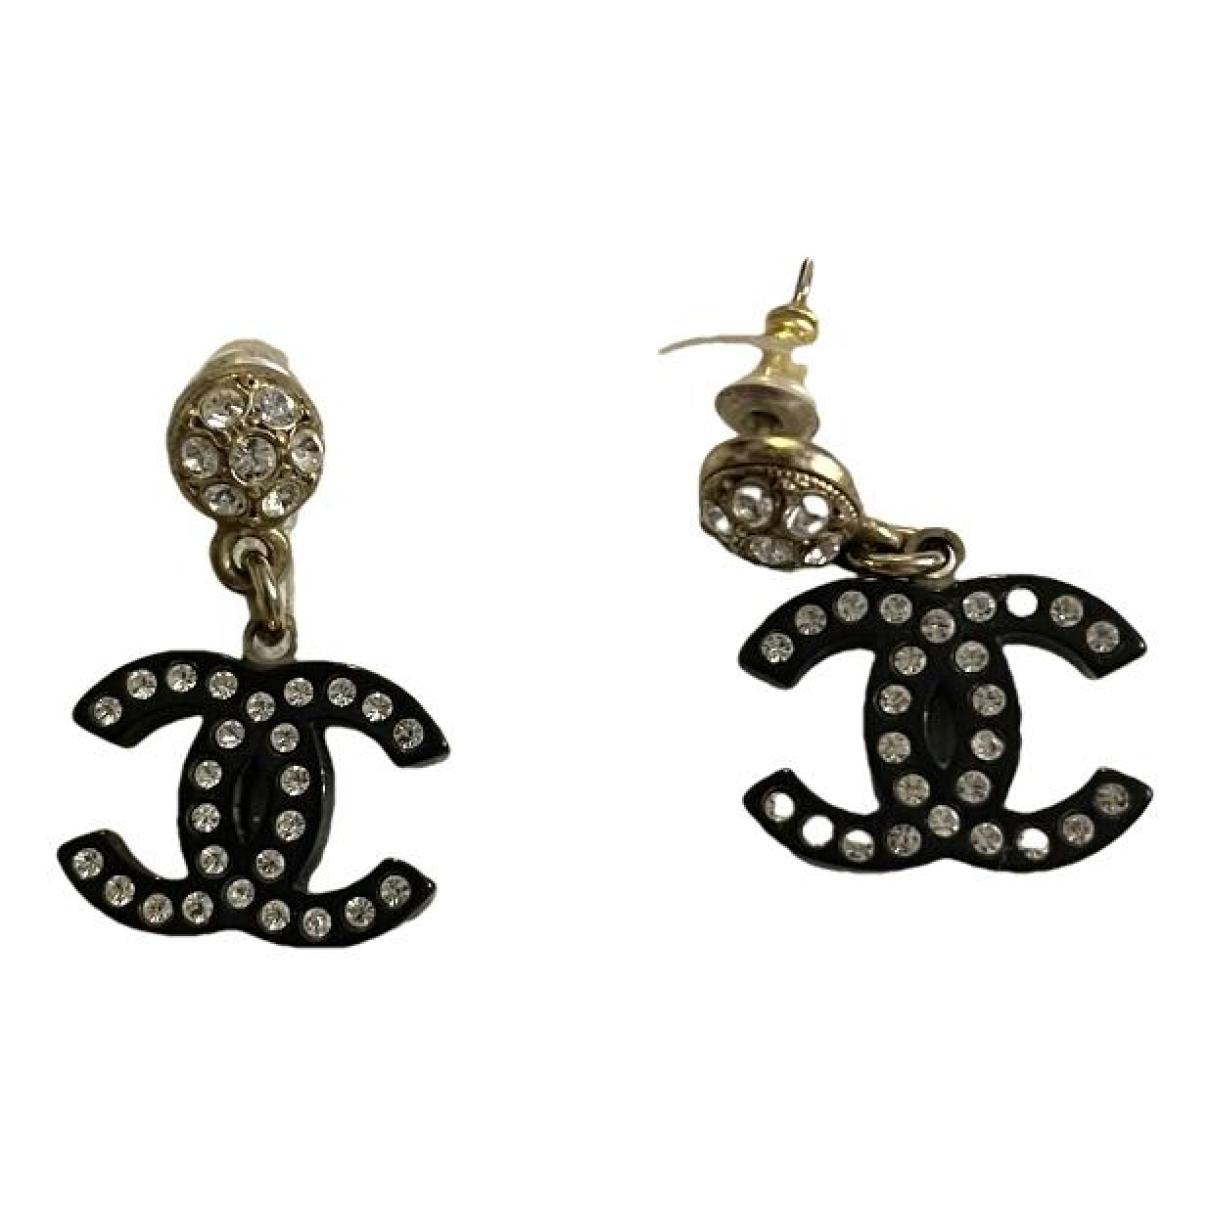 Chanel Gold Plated Metal & Rhinestone CC Clip-On Earrings, Chanel